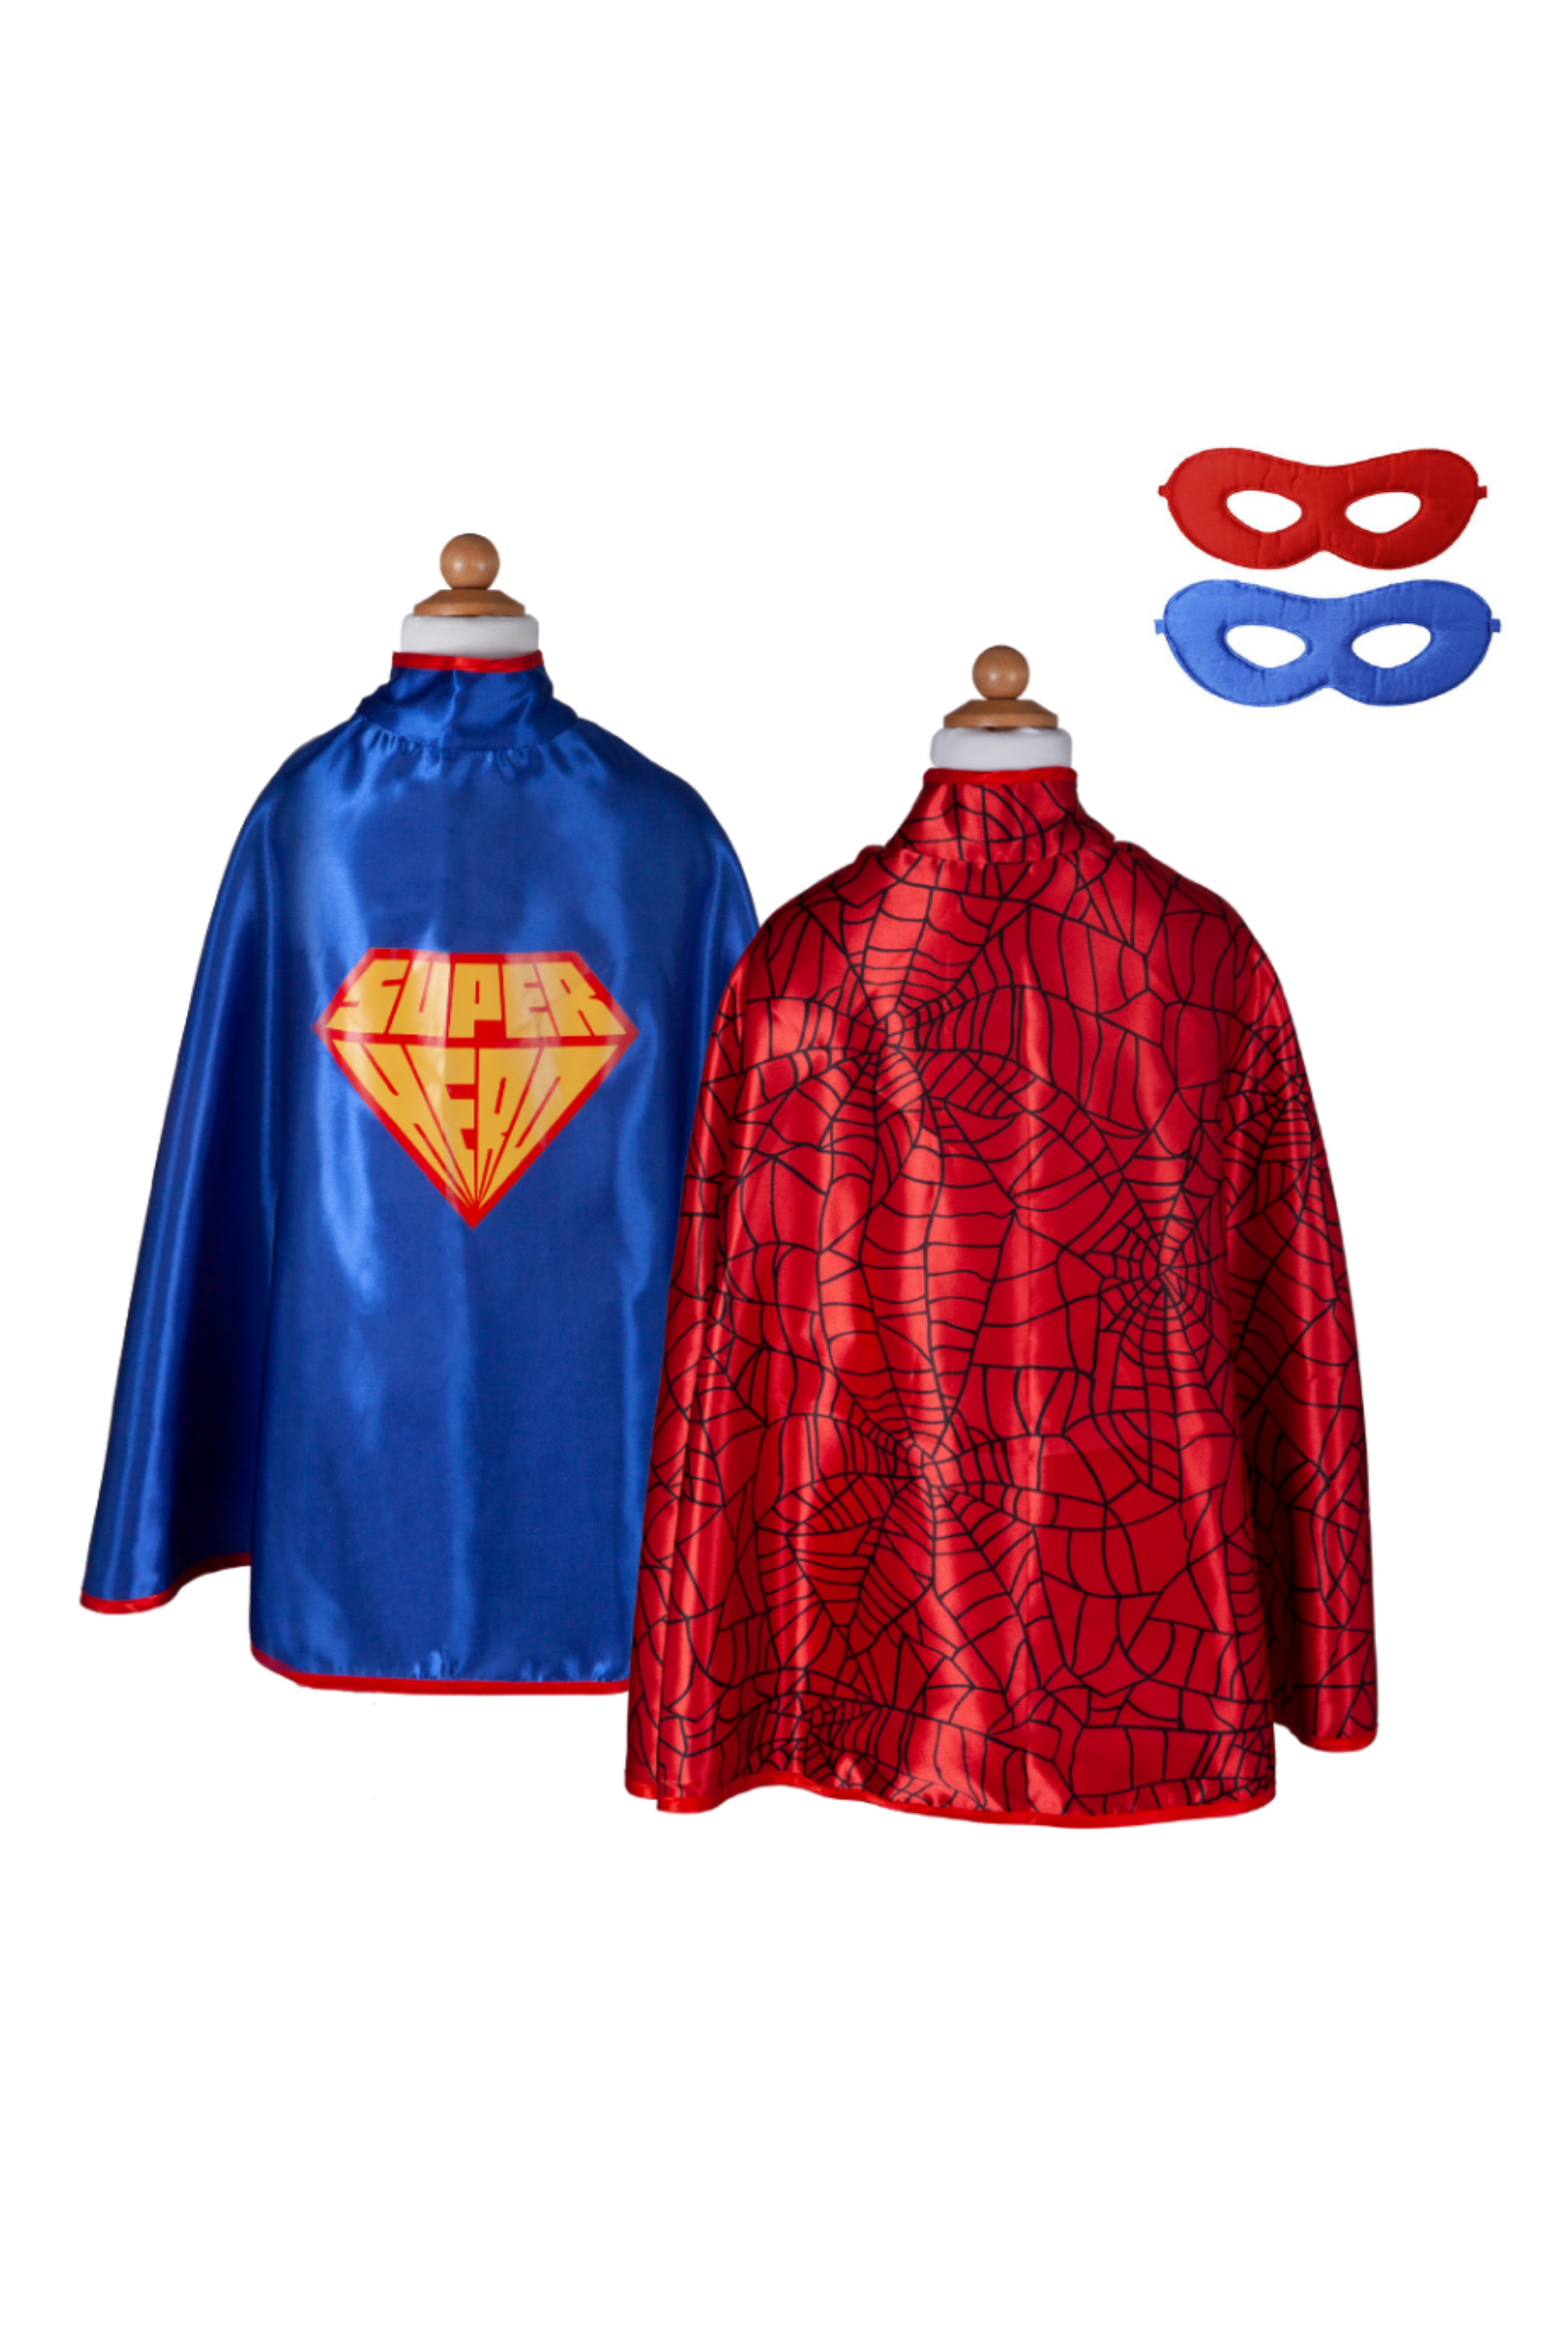 Reversible Superhero/Spider Cape with Mask